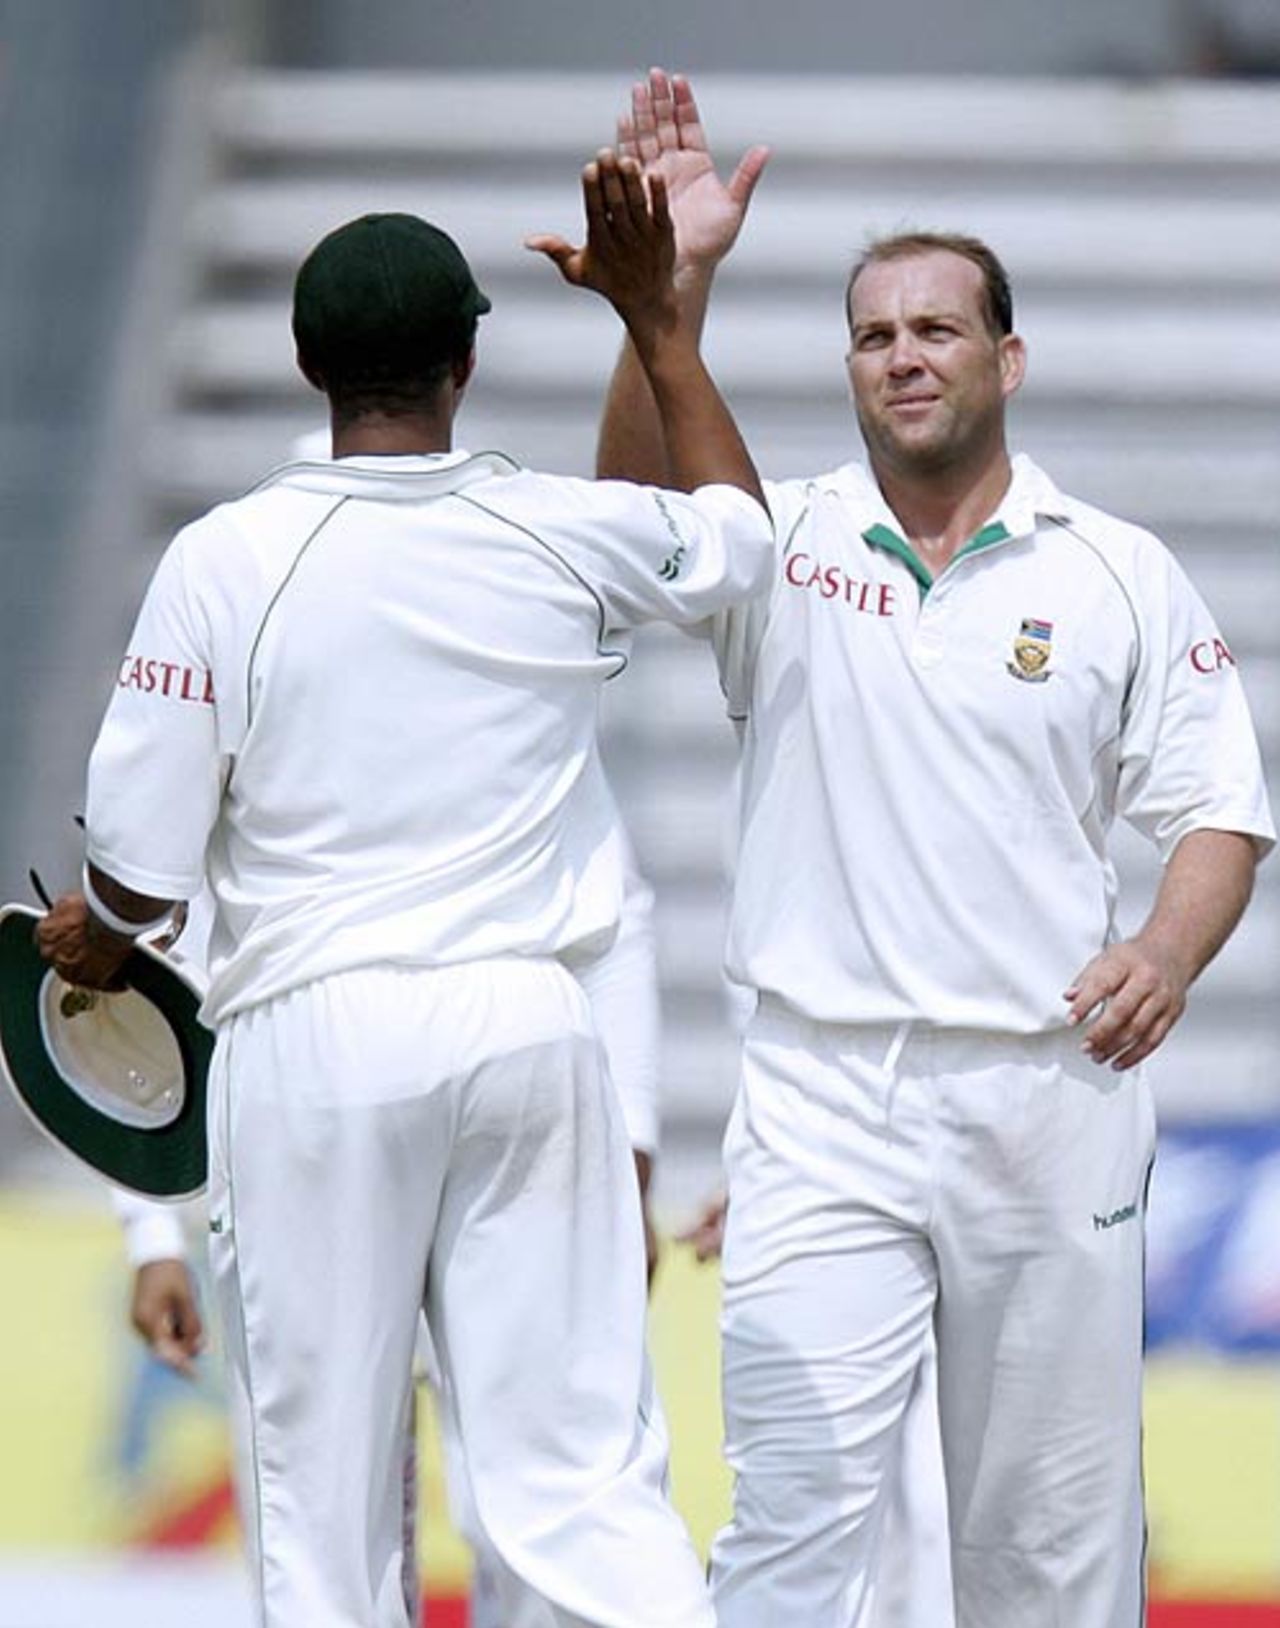 Jacques Kallis enjoys a few high-fives after his five-wicket haul, Bangladesh v South Africa, 1st Test, Mirpur, 3rd day, February 24, 2008 